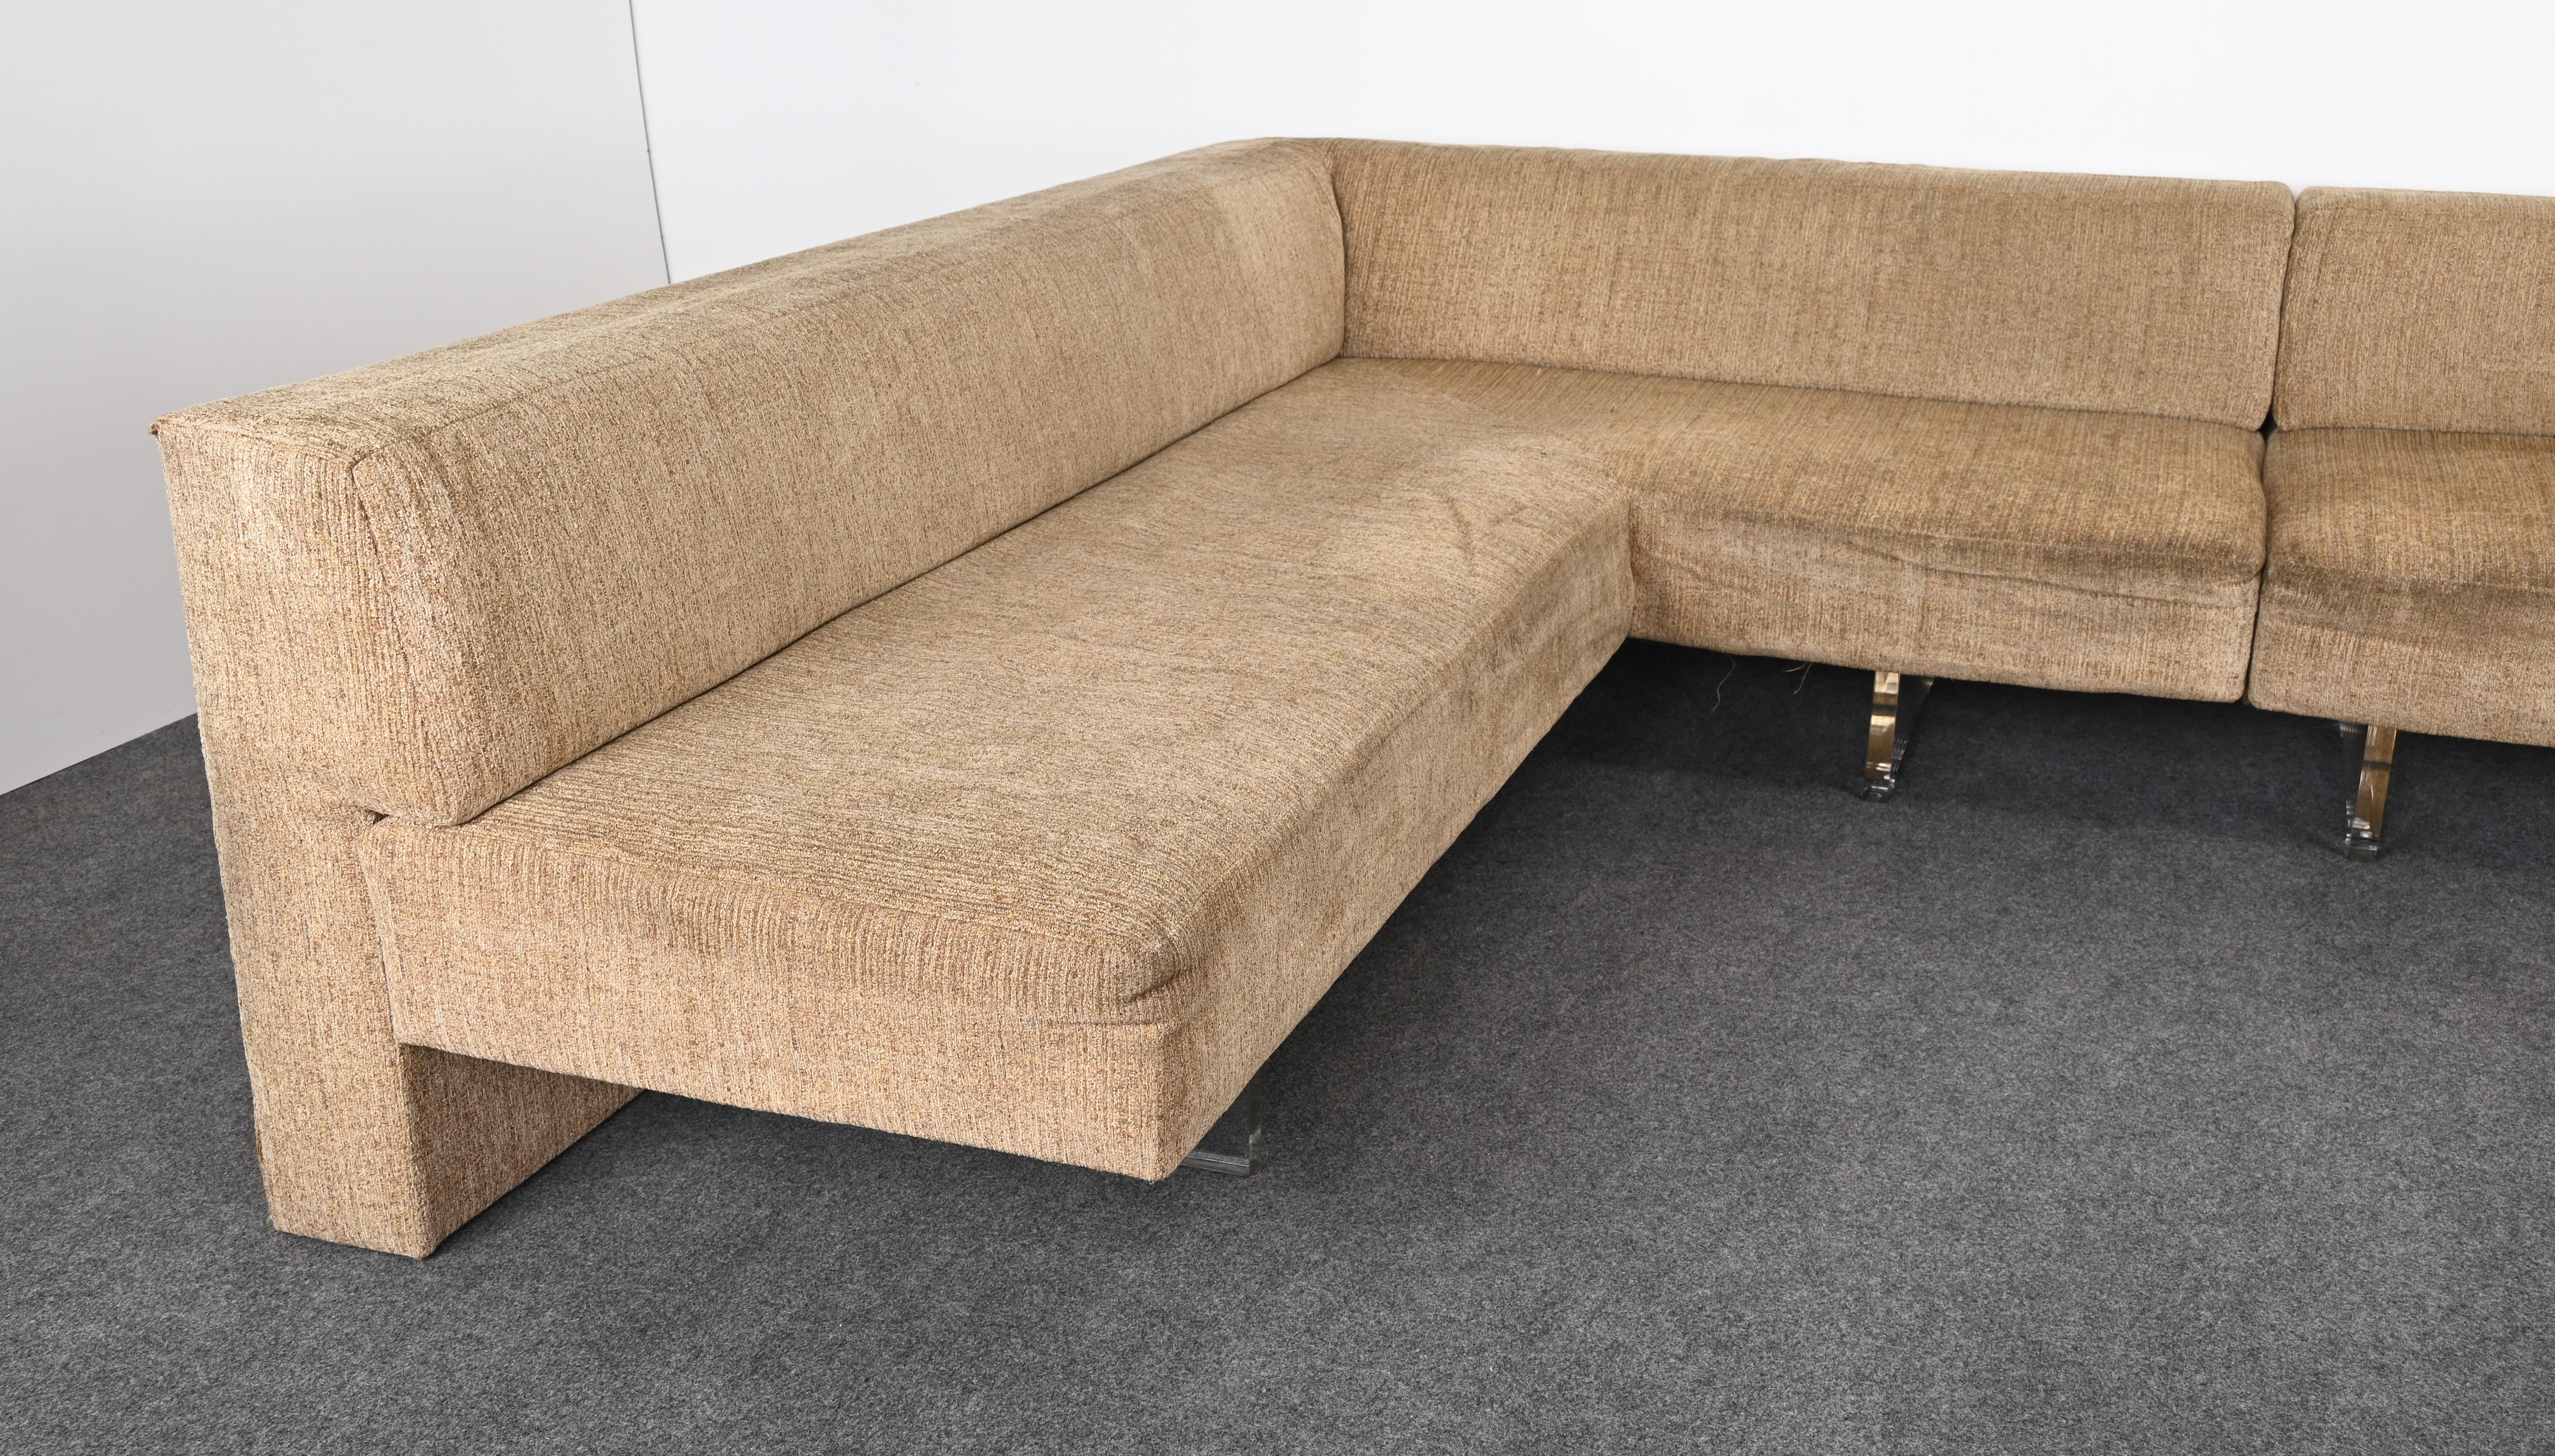 Monumental Sectional Sofa Designed by Vladimir Kagan, 1970s For Sale 1